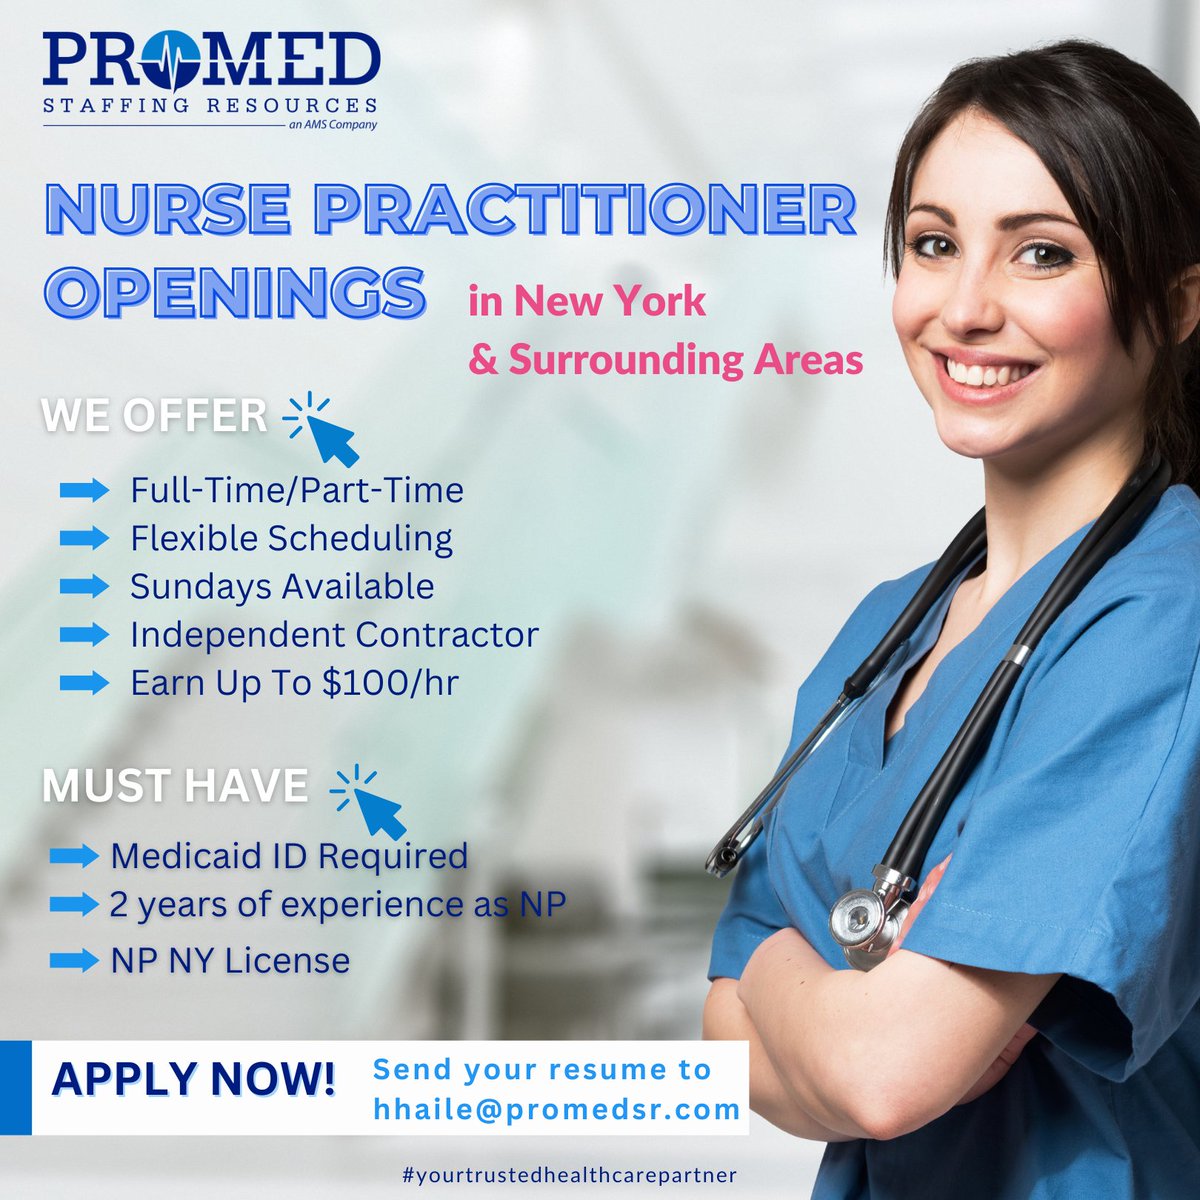 Enjoy flexible scheduling and generous pay up to $100/hour! Reach out to Hemeden Haile at hhaile@promedsr.com

#nursepractitioner #maximus #promedsr #nursepractitionerjobs #nursepractitionersinyc #newyorknursepractitioners #practitionerorder #newyorkjobs #hiringinewyork